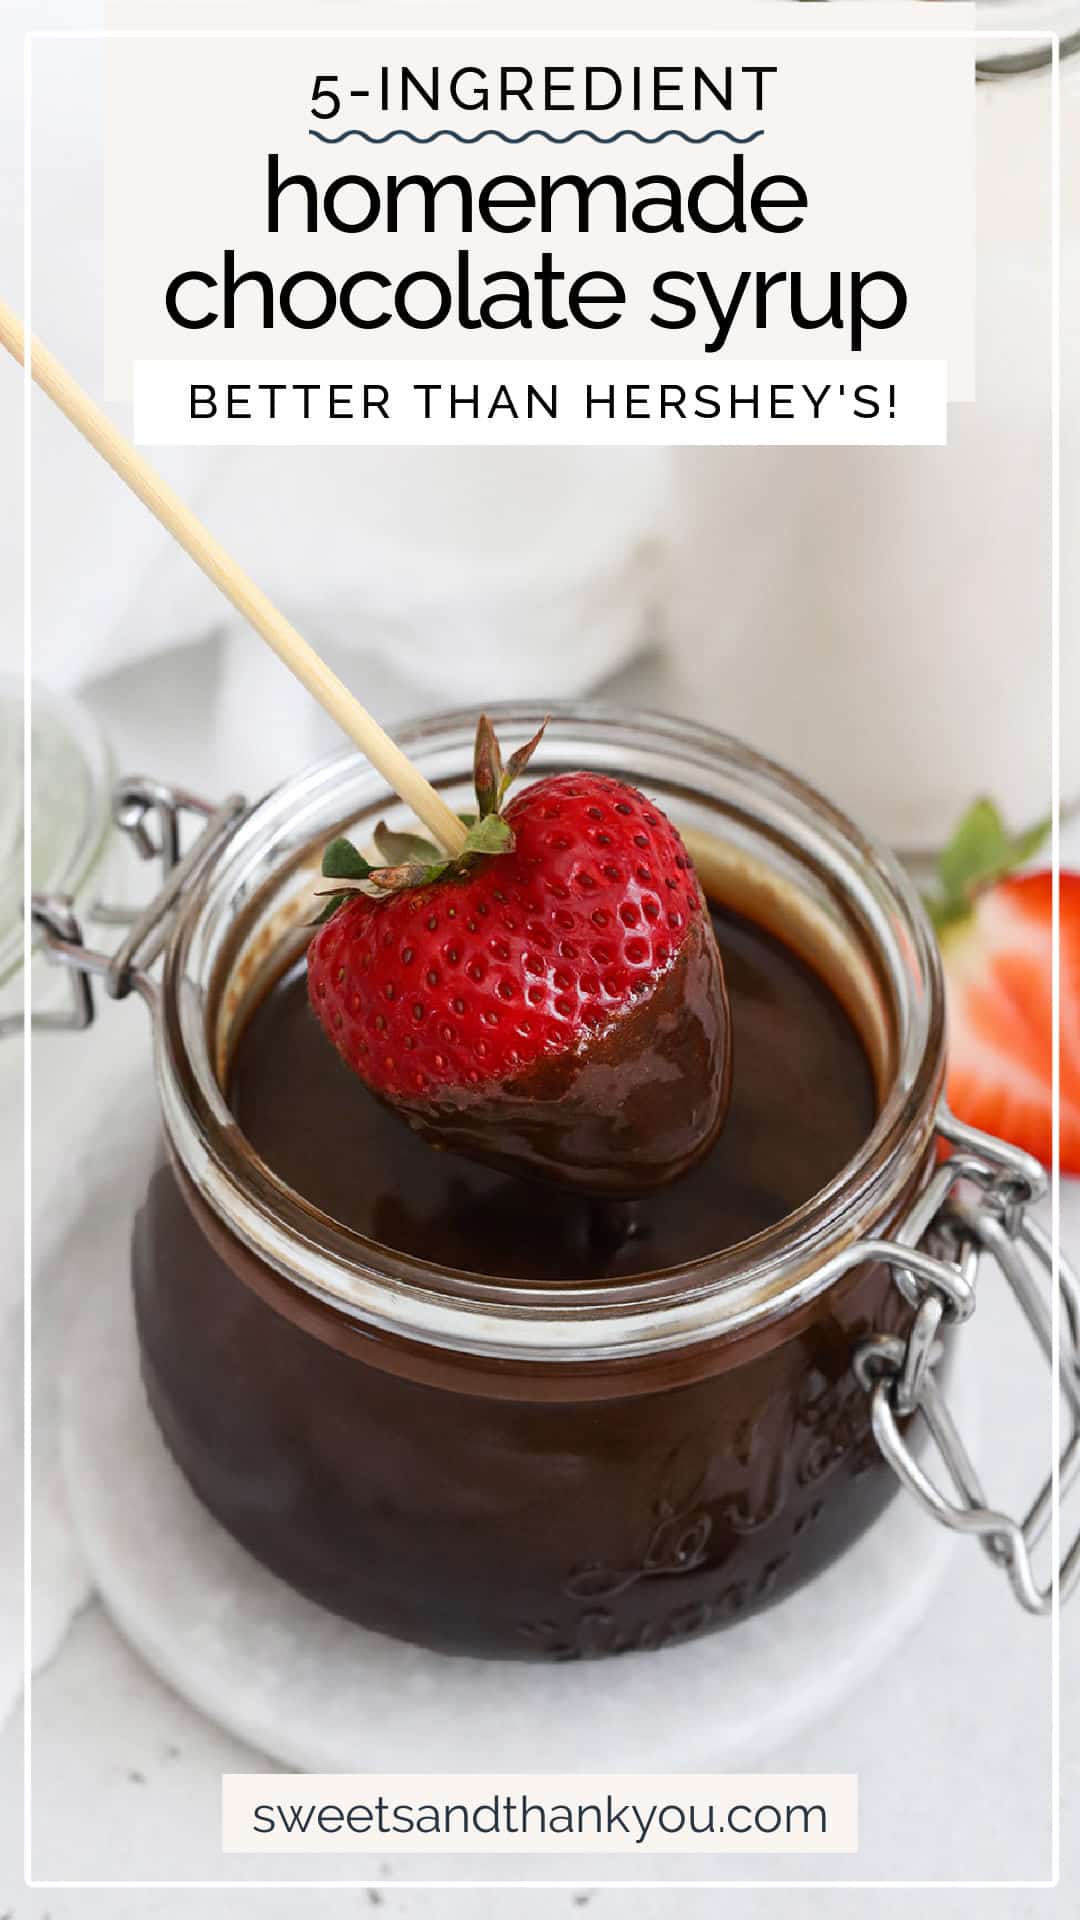 Homemade Chocolate Syrup recipe - This easy chocolate sauce is perfect for ice cream, chocolate milk, and so much more. It's like homemade Hershey's syrup! // Hersheys syrup copycat // homemade chocolate sauce / chocolate sauce fruit dip / 5 ingredient chocolate sauce / chocolate sauce for ice cream / cake plating chocolate sauce / chocolate syrup for ice cream / chocolate syrup fruit dip / hershey's syrup copycat / homemade hershey's chocolate syrup / chocolate syrup for chocolate milk